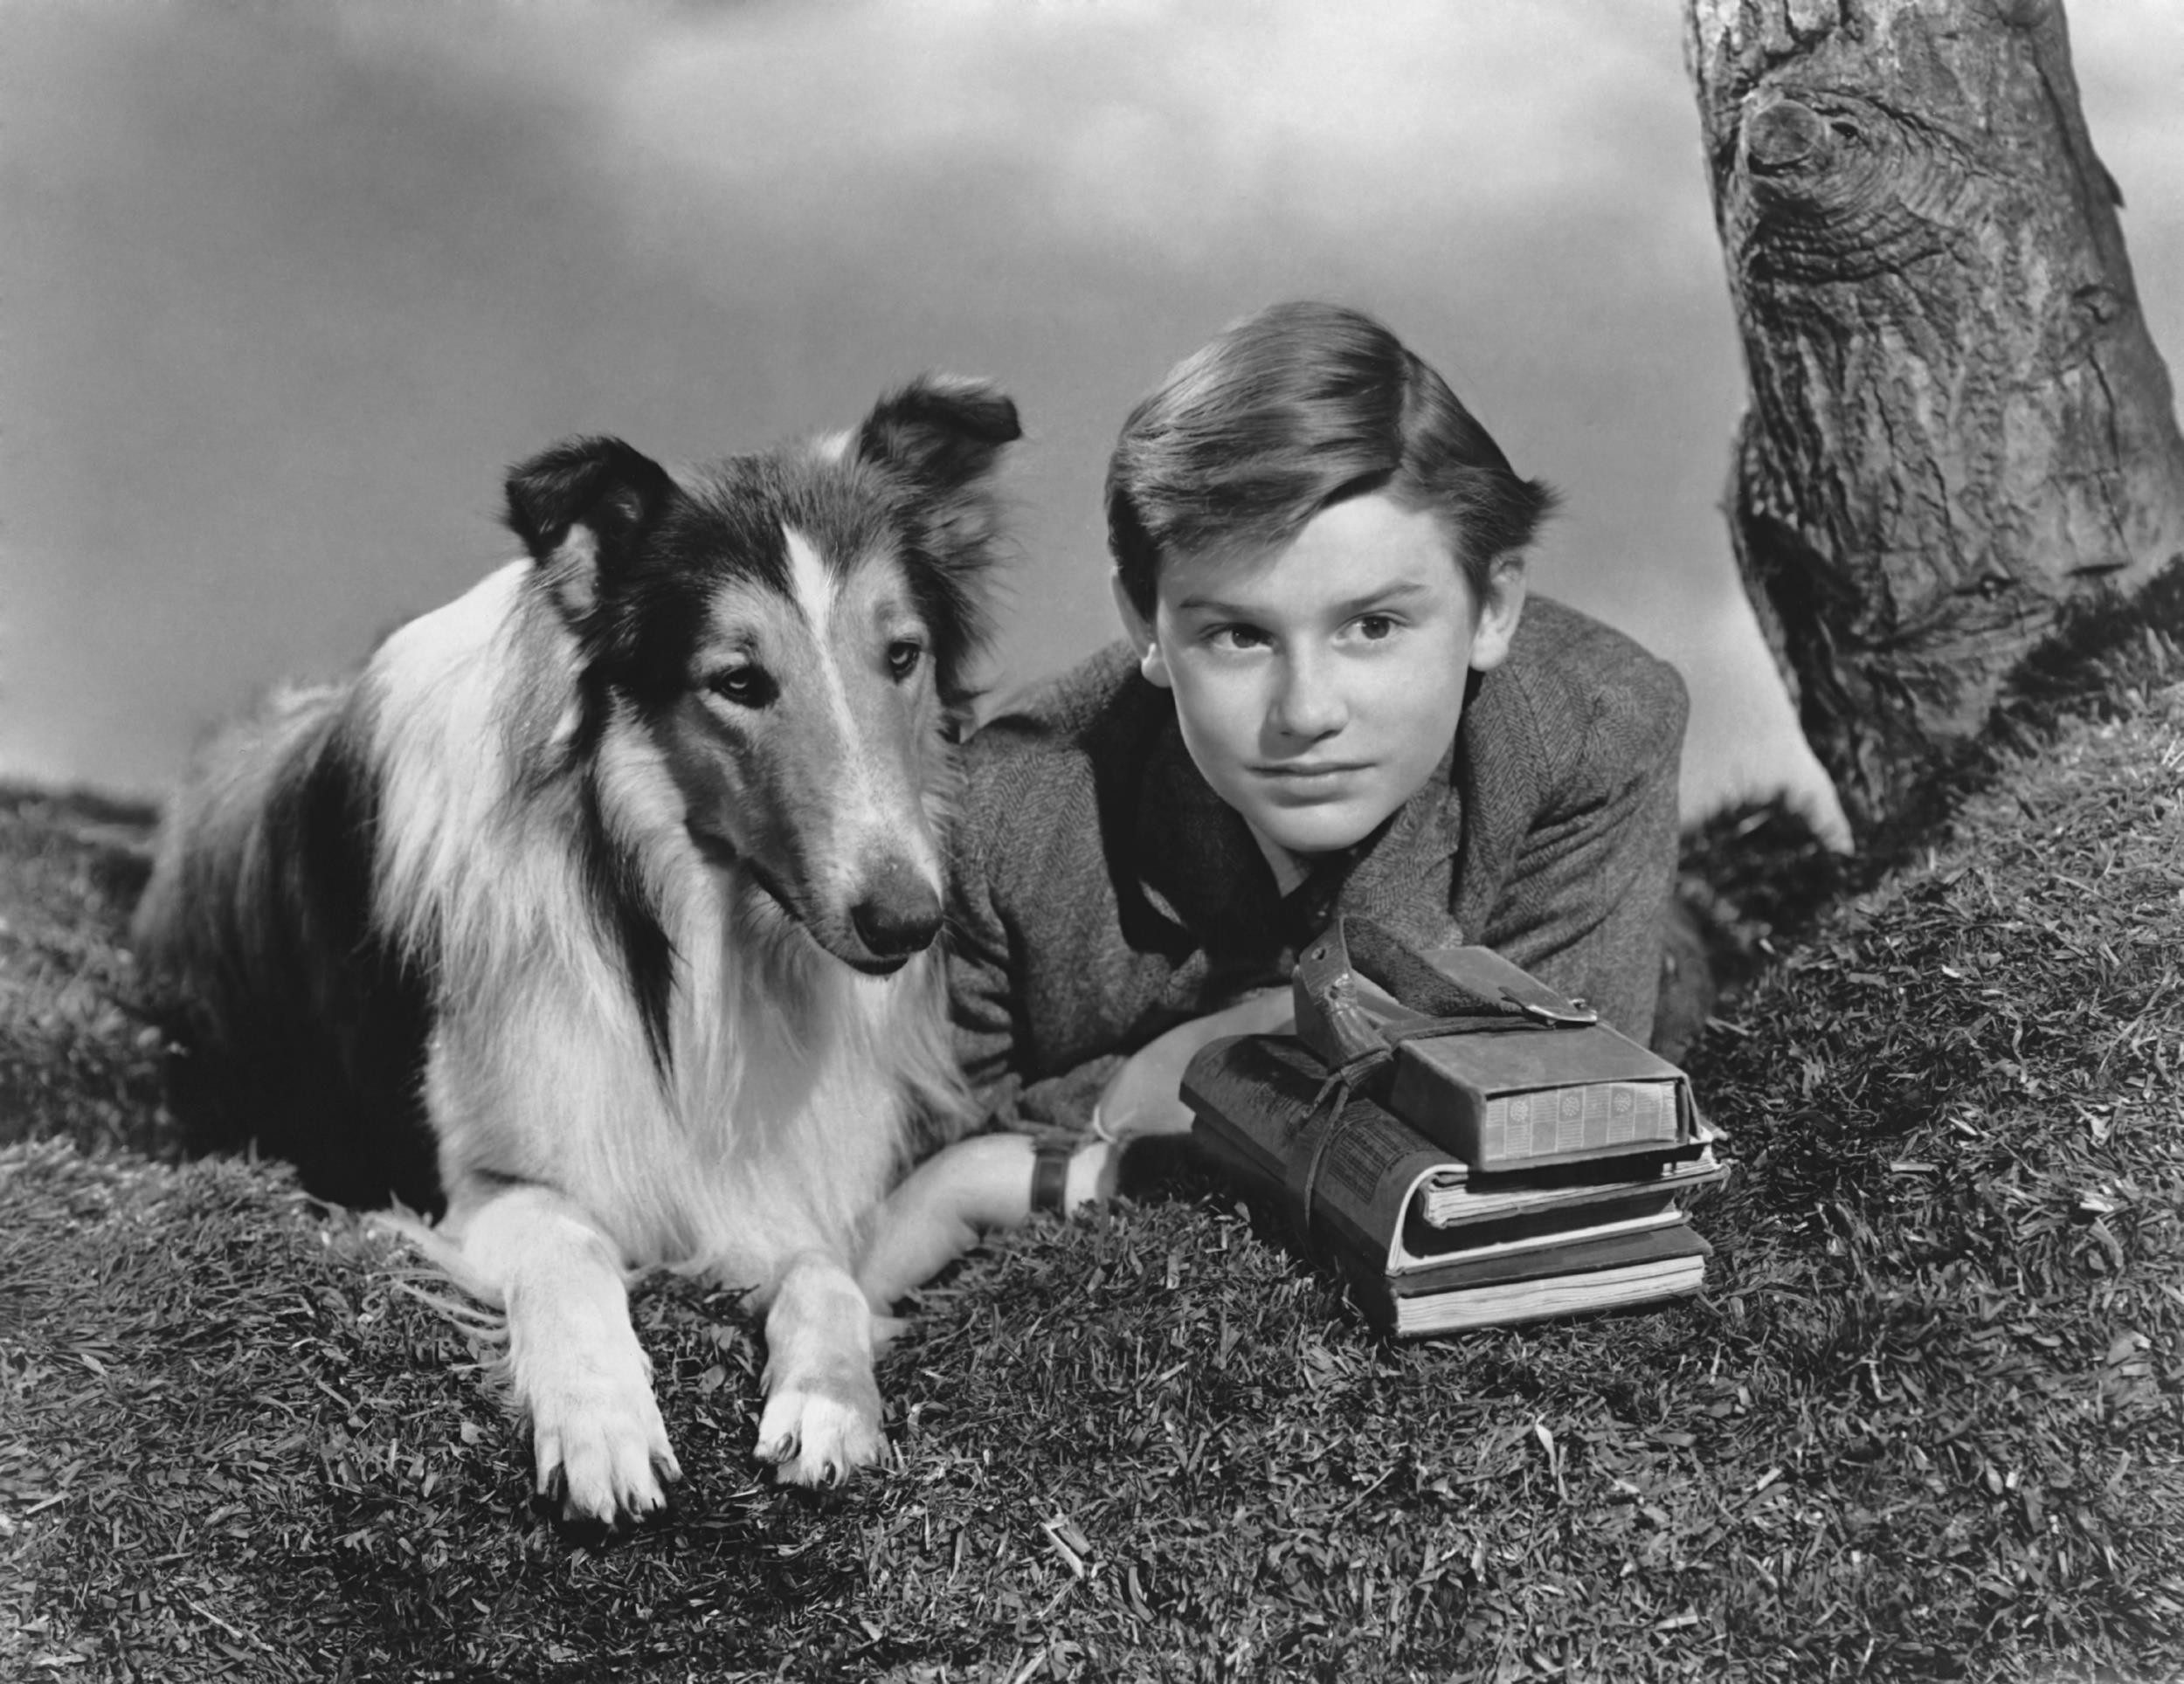 <p>Lassie has saved more people from fires, fast-moving rivers and other dangerous predicaments than we can count over the last seven or eight decades, but it all started with 1943’s wildly successful “Lassie Come Home.” The MGM film starred Roddy McDowall, Donald Crisp, Elsa Lanchester, Elizabeth Taylor and a dog named Pal as Lassie. Pal was actually a male collie, but he was nevertheless cast as Lassie because sexism was alive and well back in the ‘40s. (Just kidding; the decision reportedly came about because female collies tend to shed more in the summer months, when outdoor filming usually took place.)</p><p><a href='https://www.msn.com/en-us/community/channel/vid-cj9pqbr0vn9in2b6ddcd8sfgpfq6x6utp44fssrv6mc2gtybw0us'>Follow us on MSN to see more of our exclusive entertainment content.</a></p>